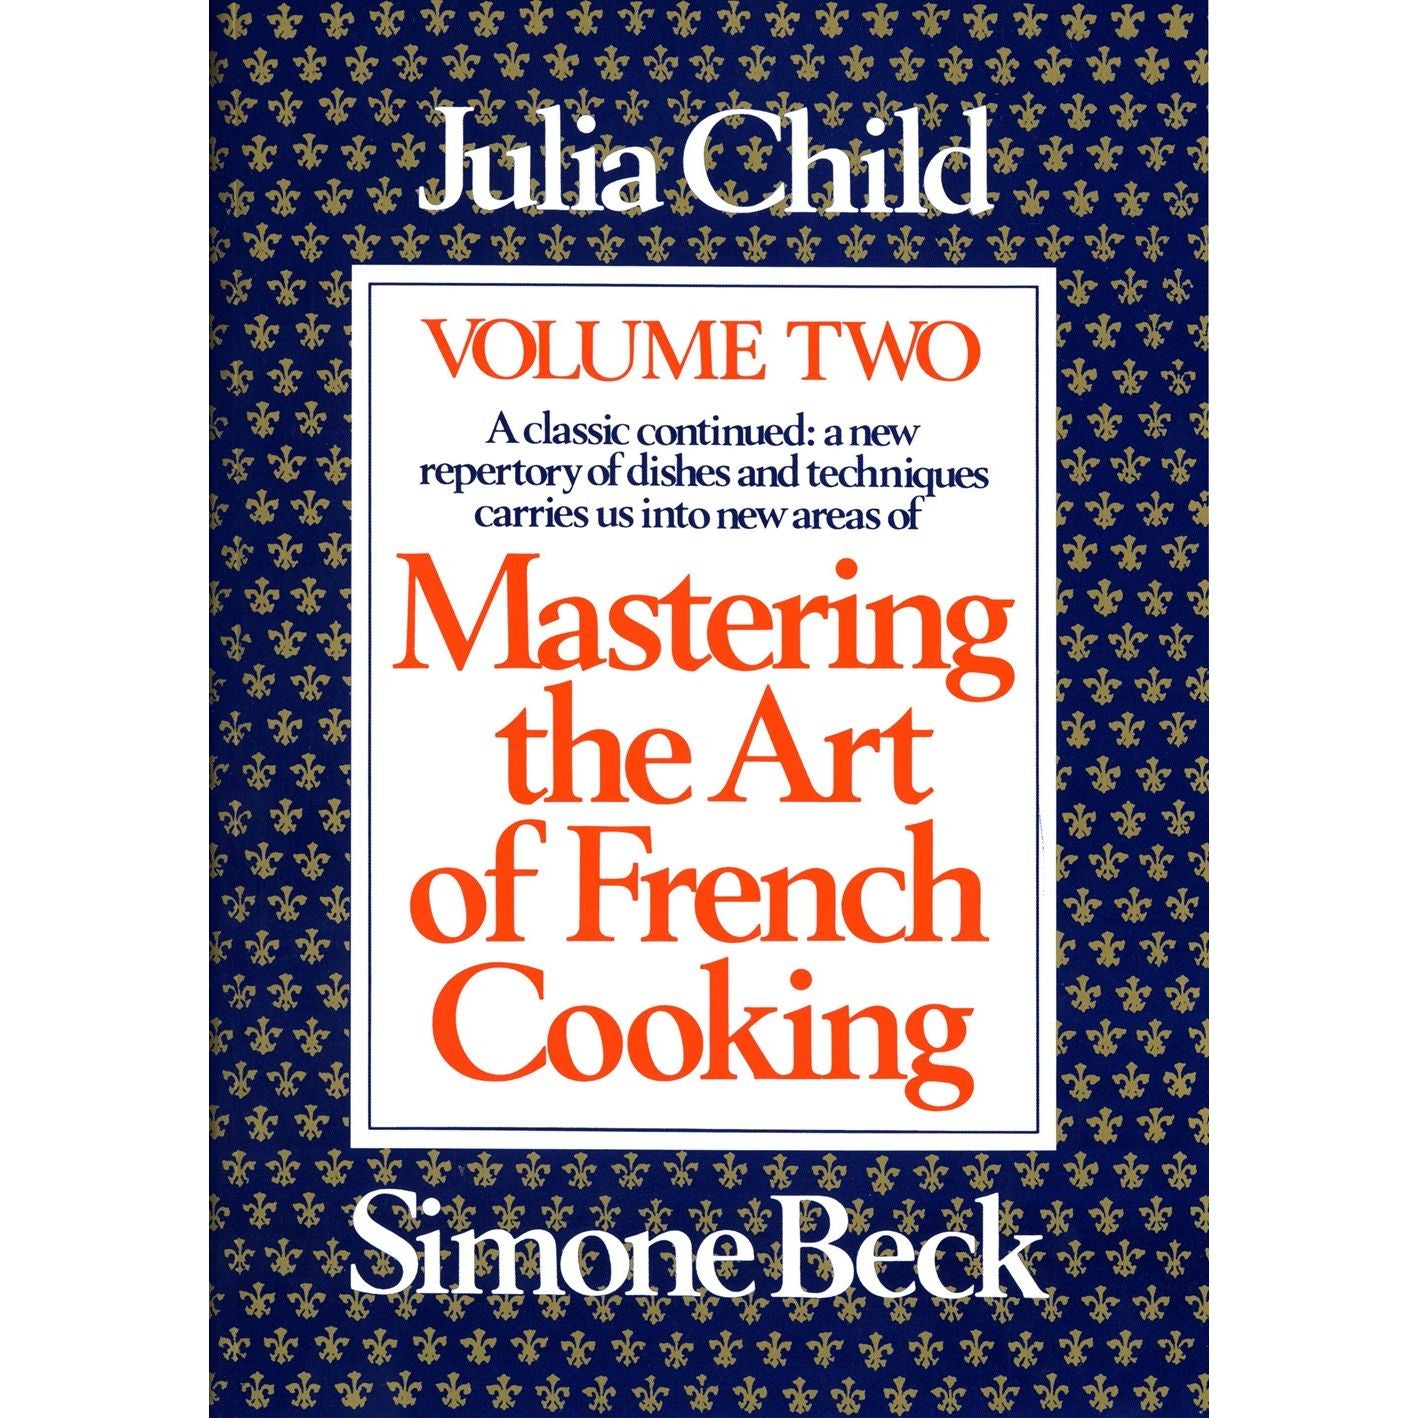 Mastering the Art of French Cooking: Vol II (Julia Child)